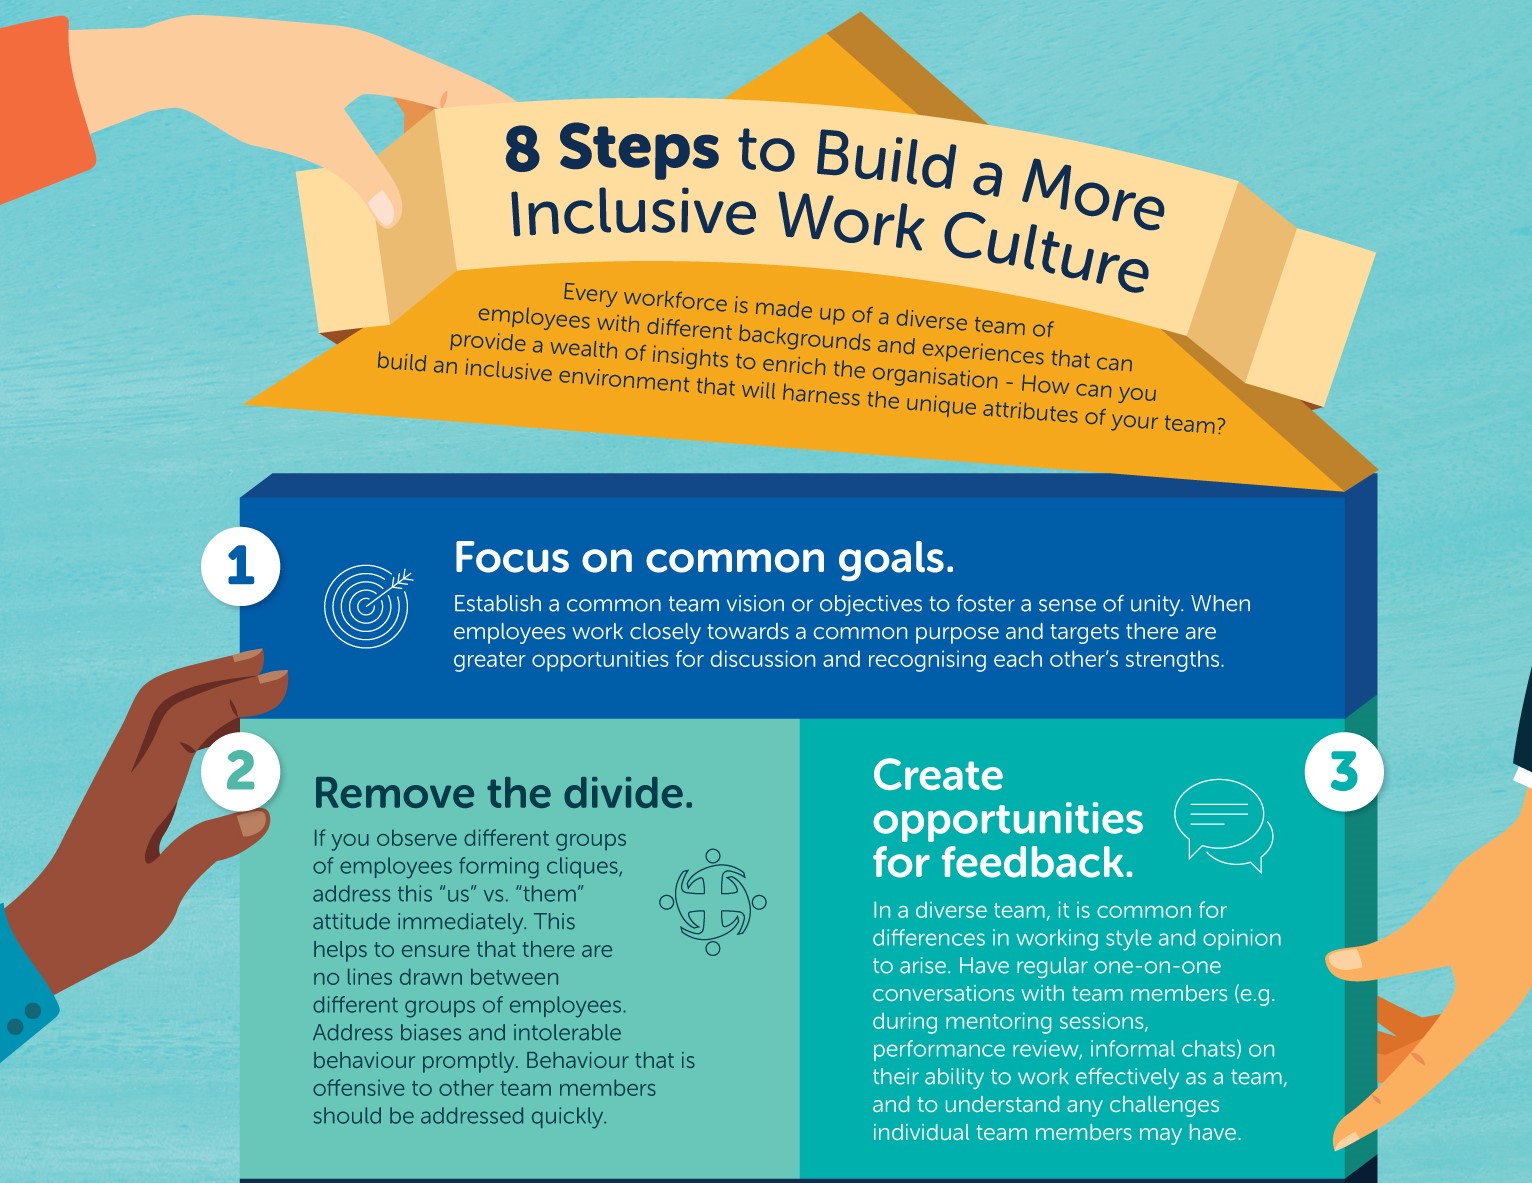 8 Steps to Build a More Inclusive Workplace